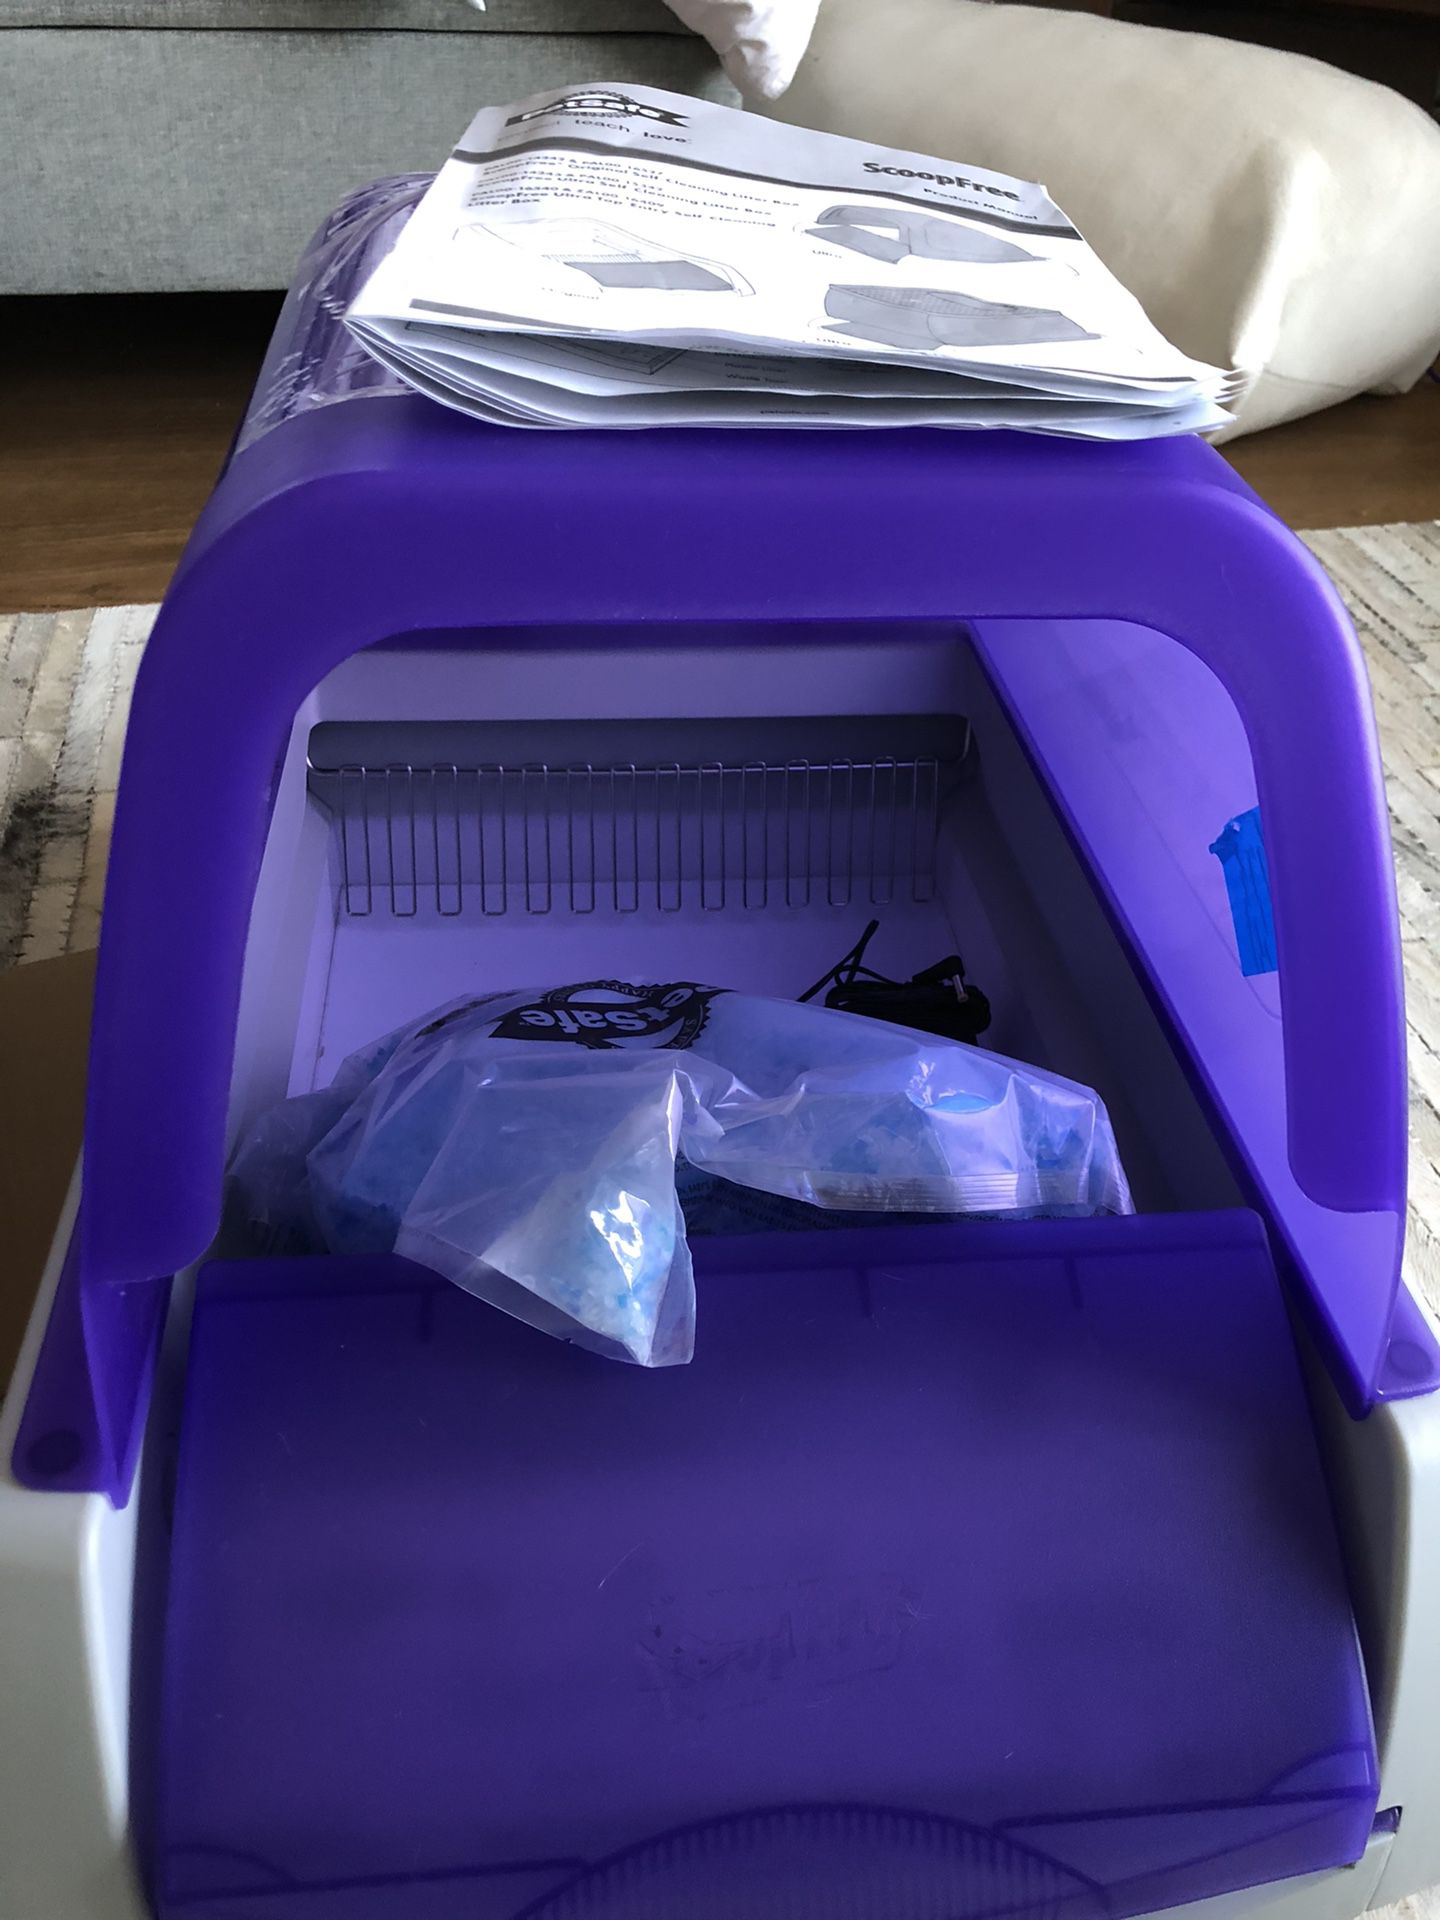 Ultra scoop free self-cleaning litter box